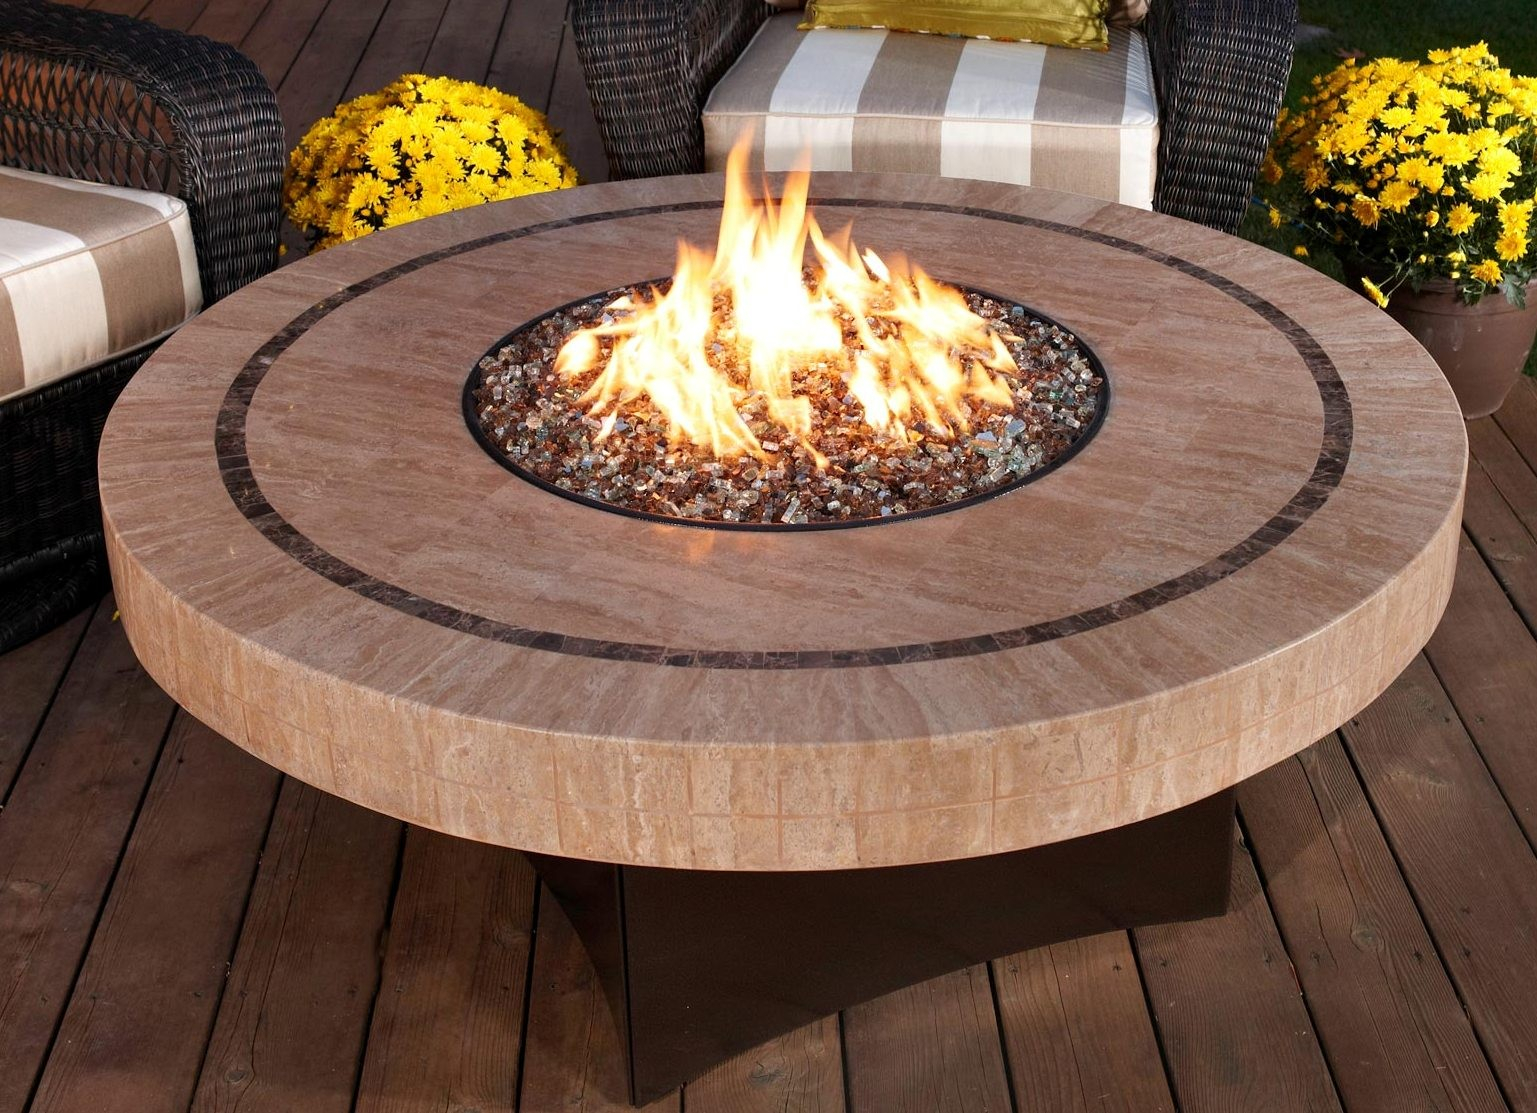 Best Natural Gas Outdoor Fire Pits 174kaartenstempnl pertaining to sizing 1537 X 1113